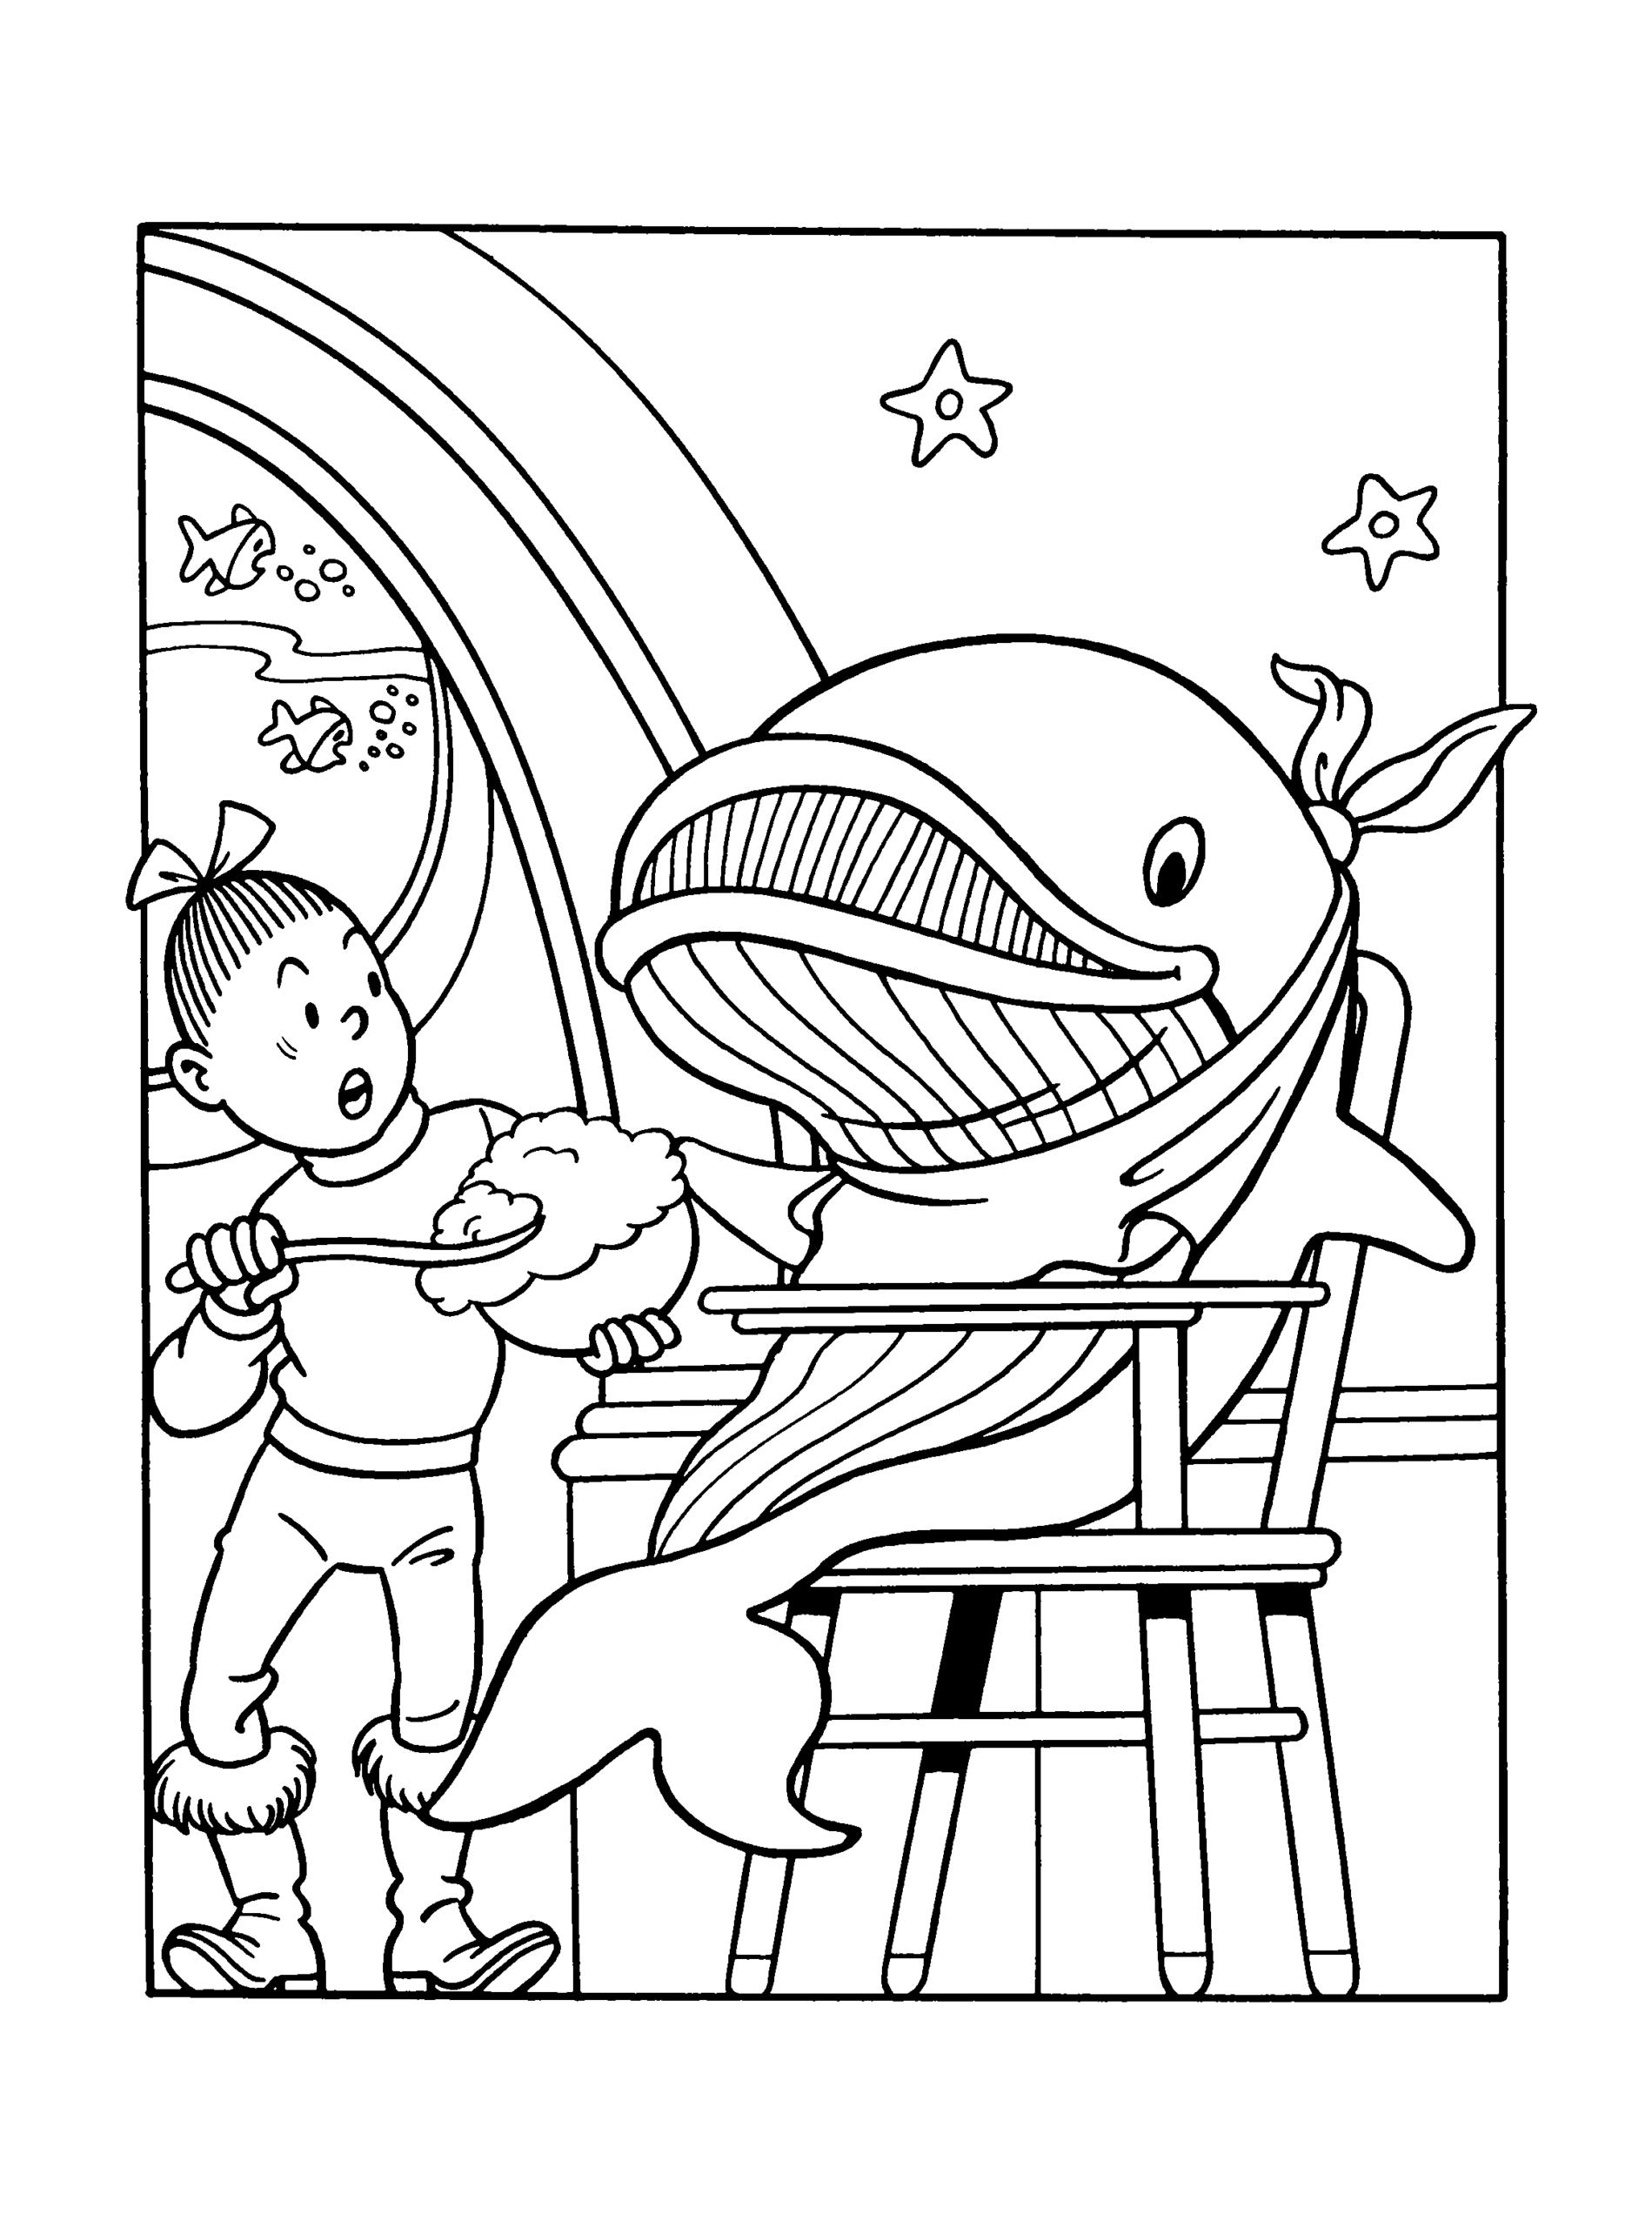 Spike and Suzy Coloring Pages Cartoons spike and suzy 55 Printable 2020 5943 Coloring4free